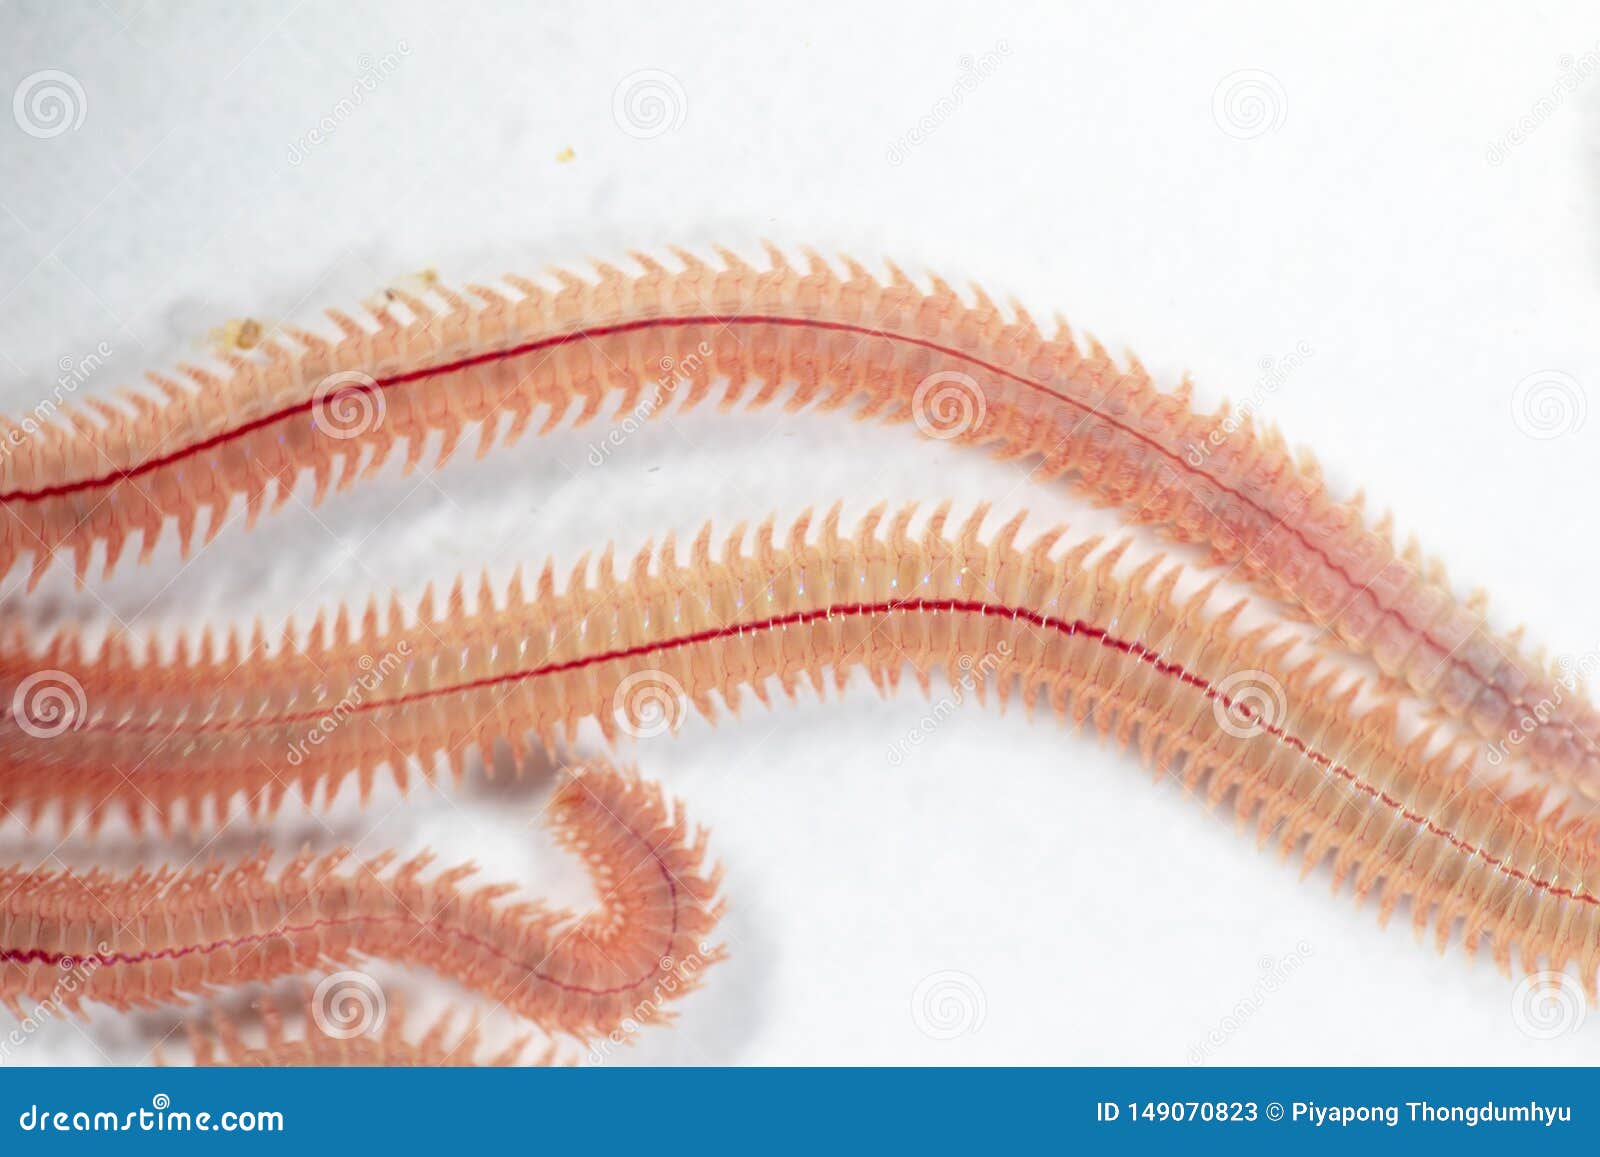 Sand Worm Perinereis Sp. is the Same Species As Sea Worms Polychaete,  Living in a Beach Area with Relatively Shallow Water. Stock Image - Image  of enteromorpha, chaetae: 149070823